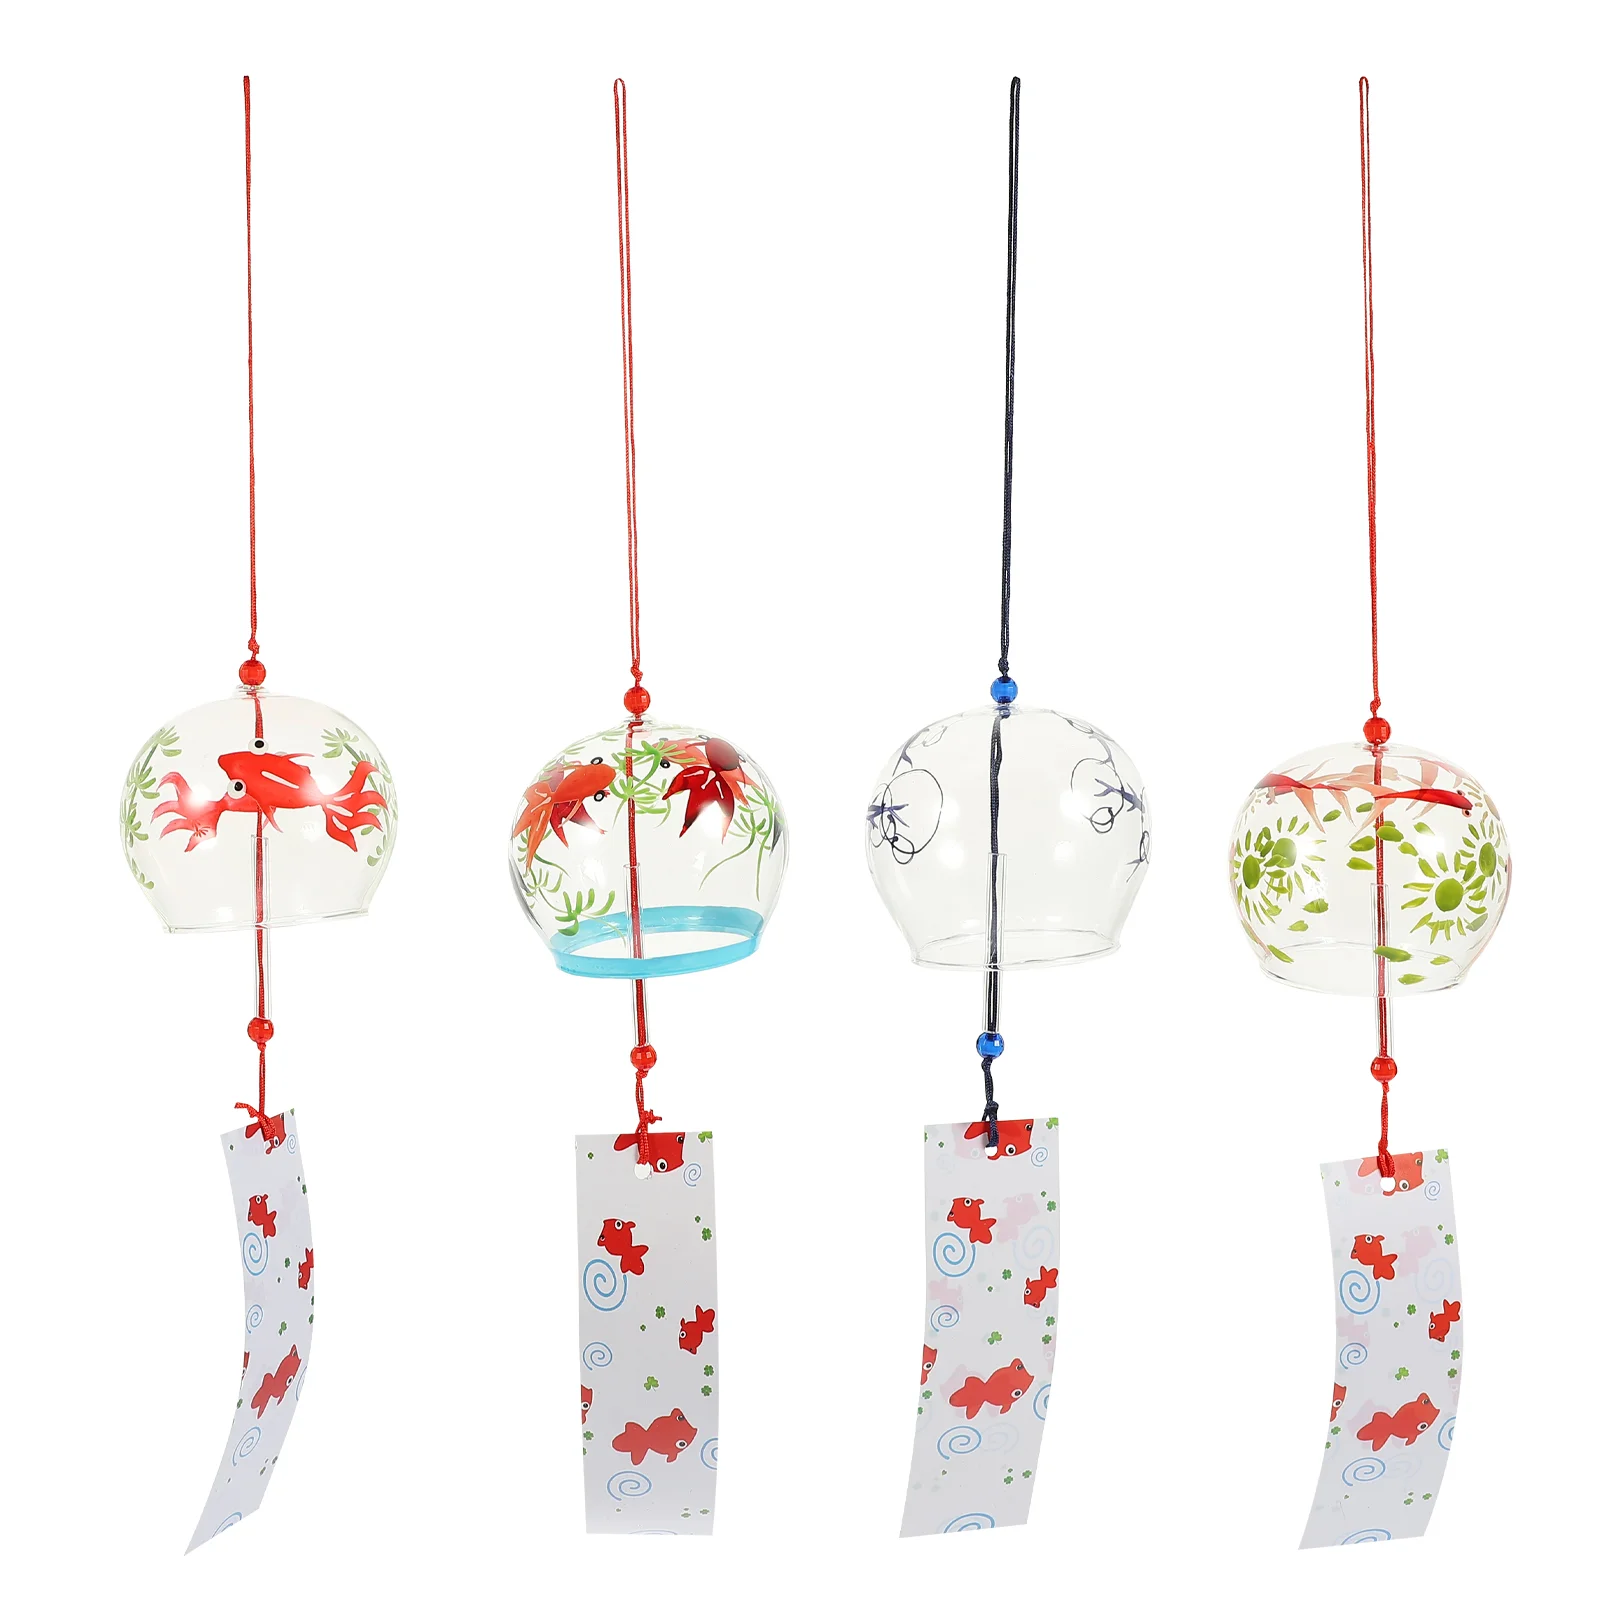 

4 Pcs Glass Goldfish Wind Chime Crystal Decorations Home Decorative Bells Birthday Gifts Friends Female Chimes Pendant Garden